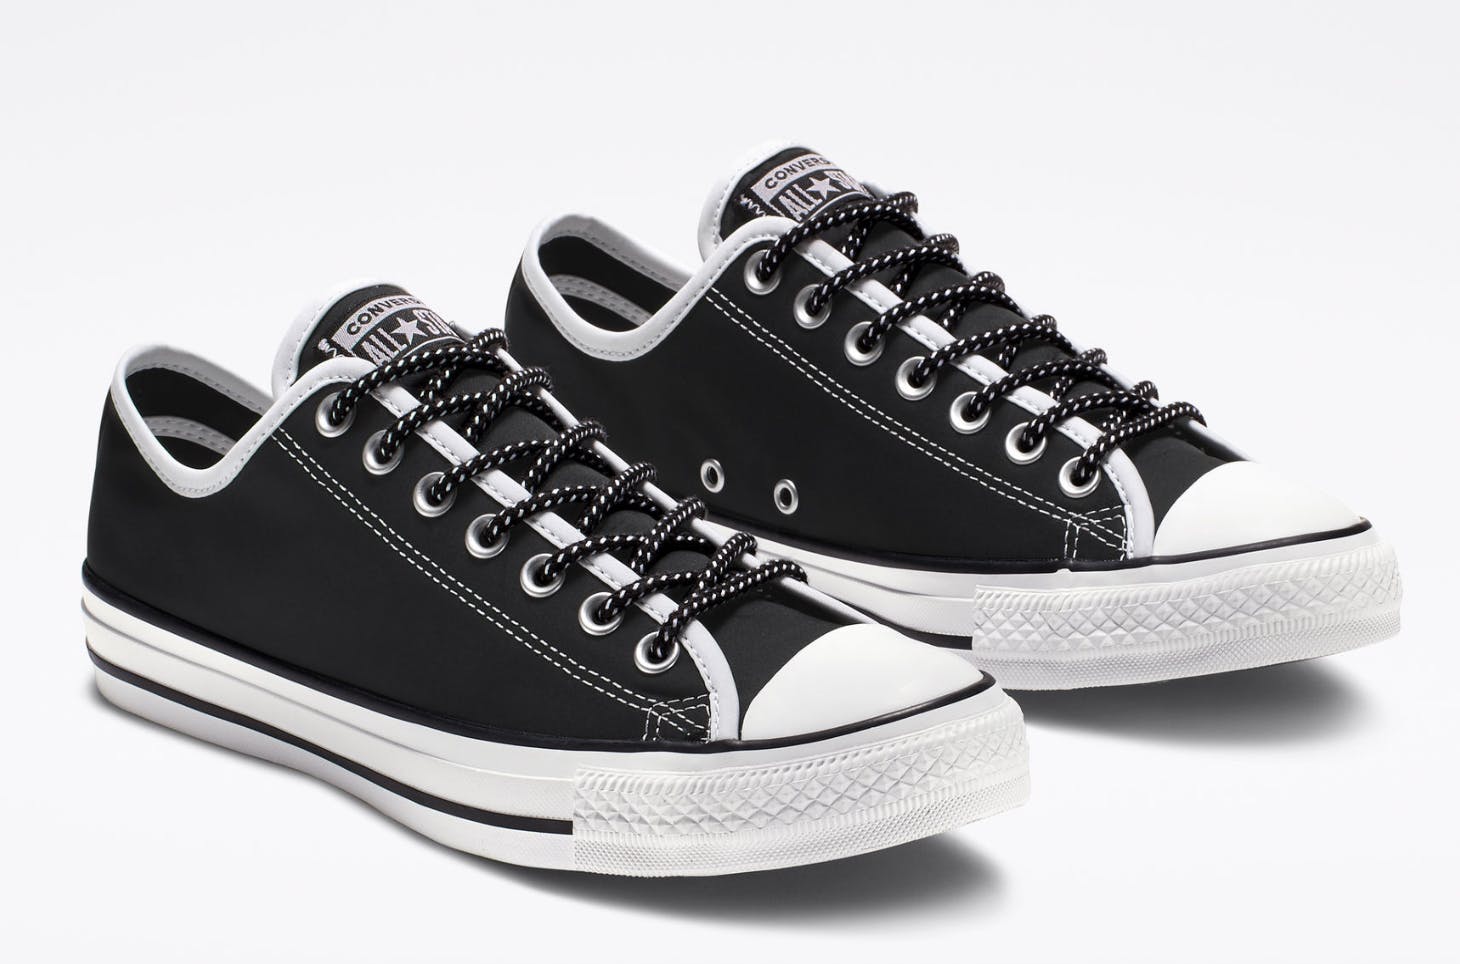 $25 Converse Shoes + Free Shipping! - The Krazy Coupon Lady